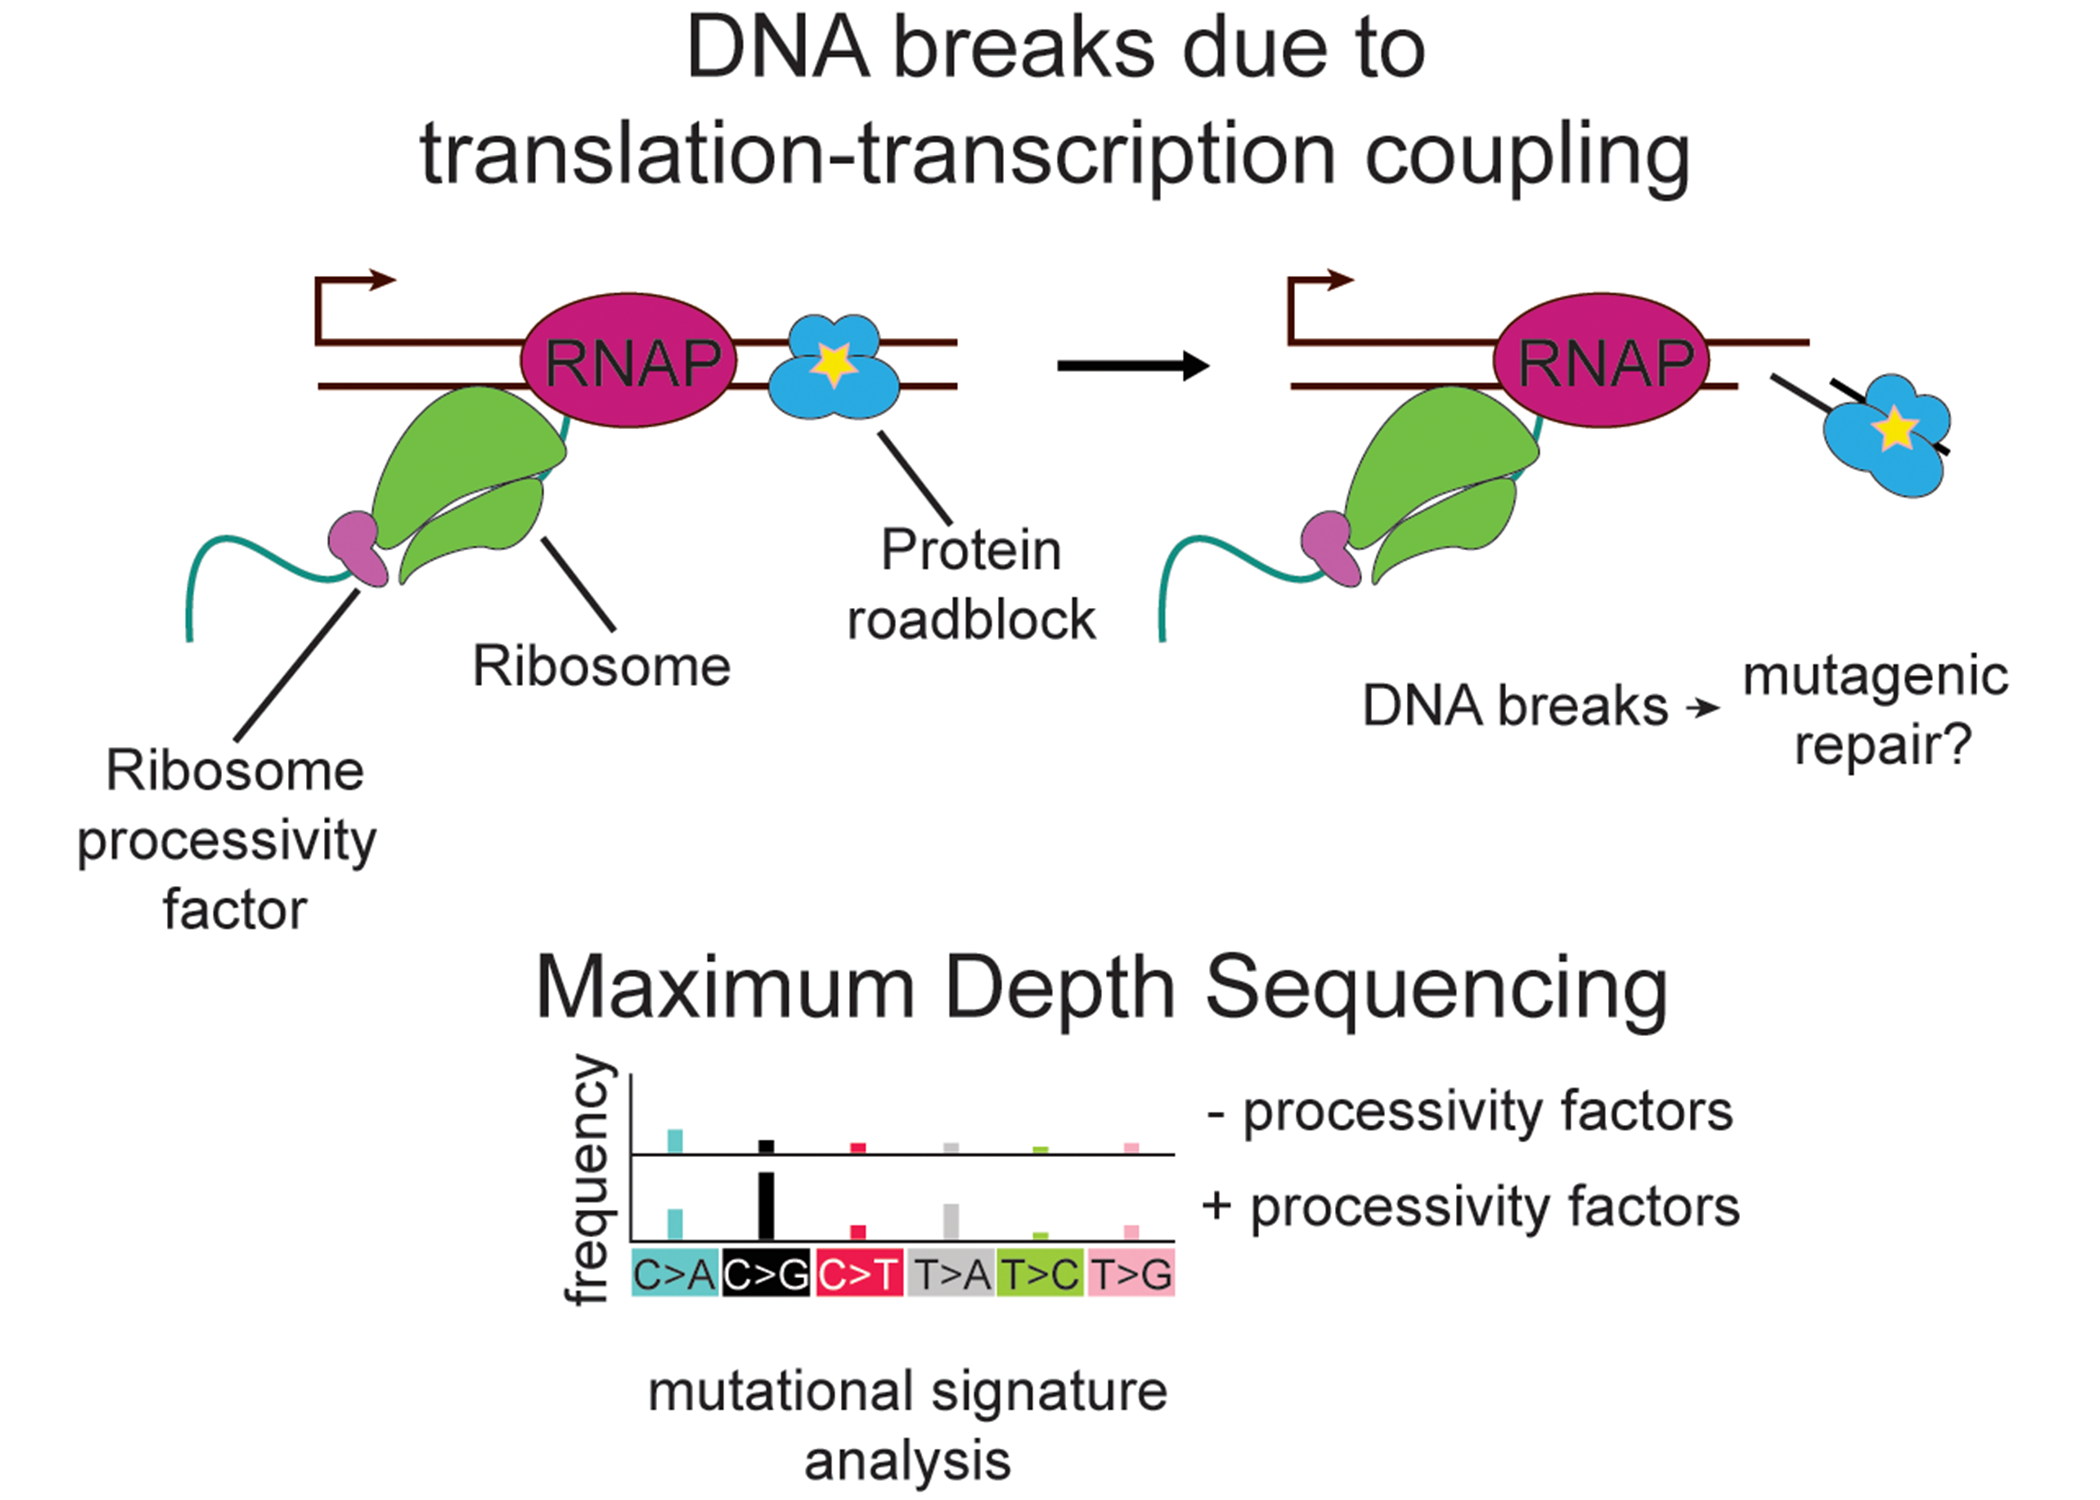 graphical depiction of DNA breaks due to translation-transcription coupling